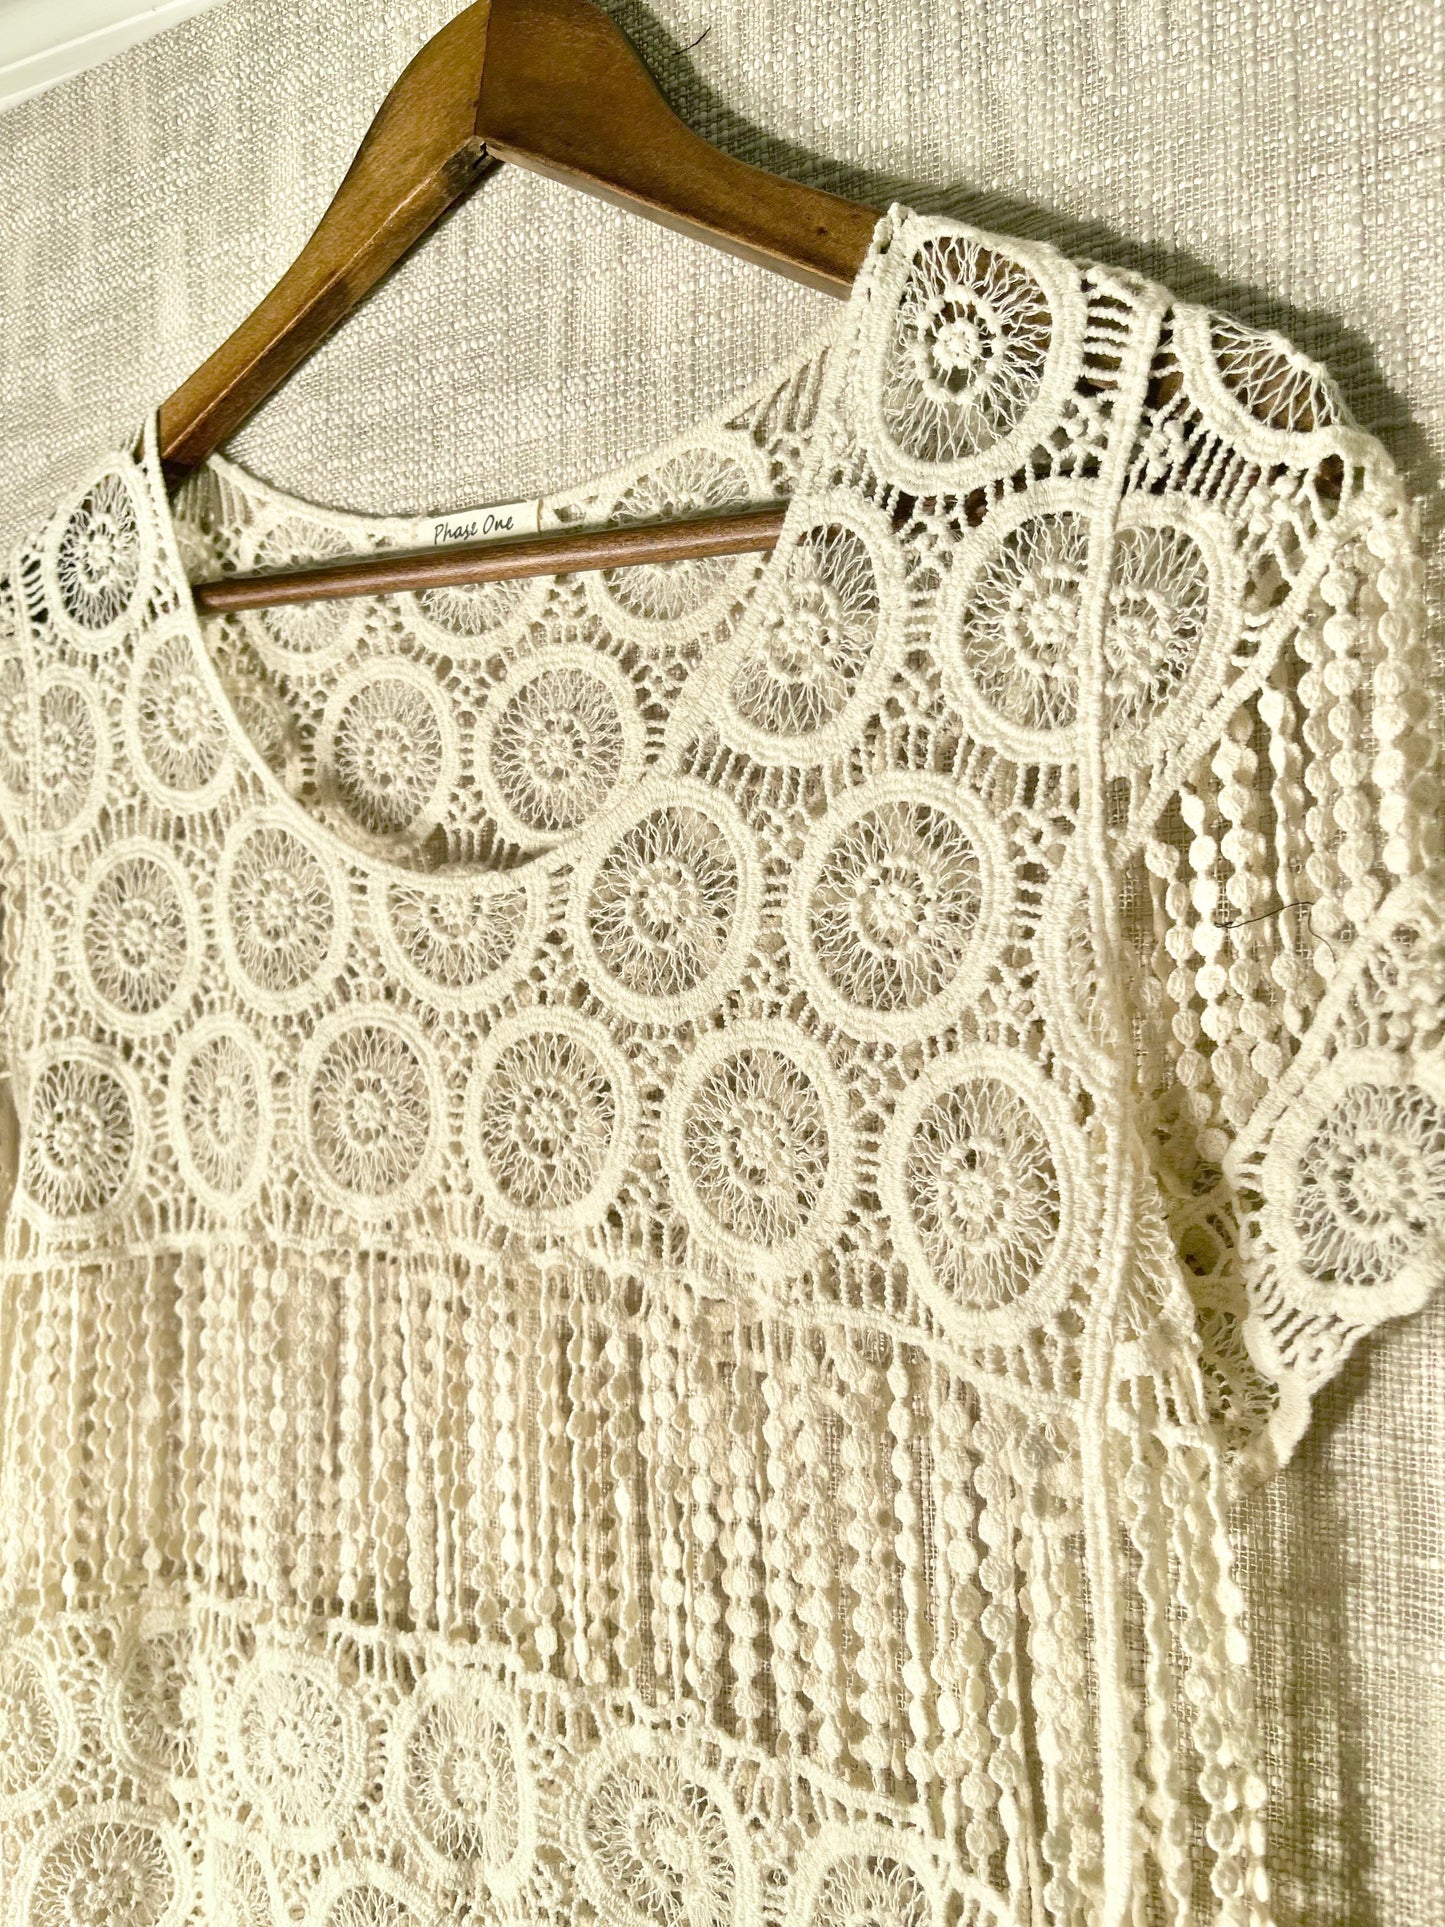 Crocheted cover up bohemian styling, boho lace coverup